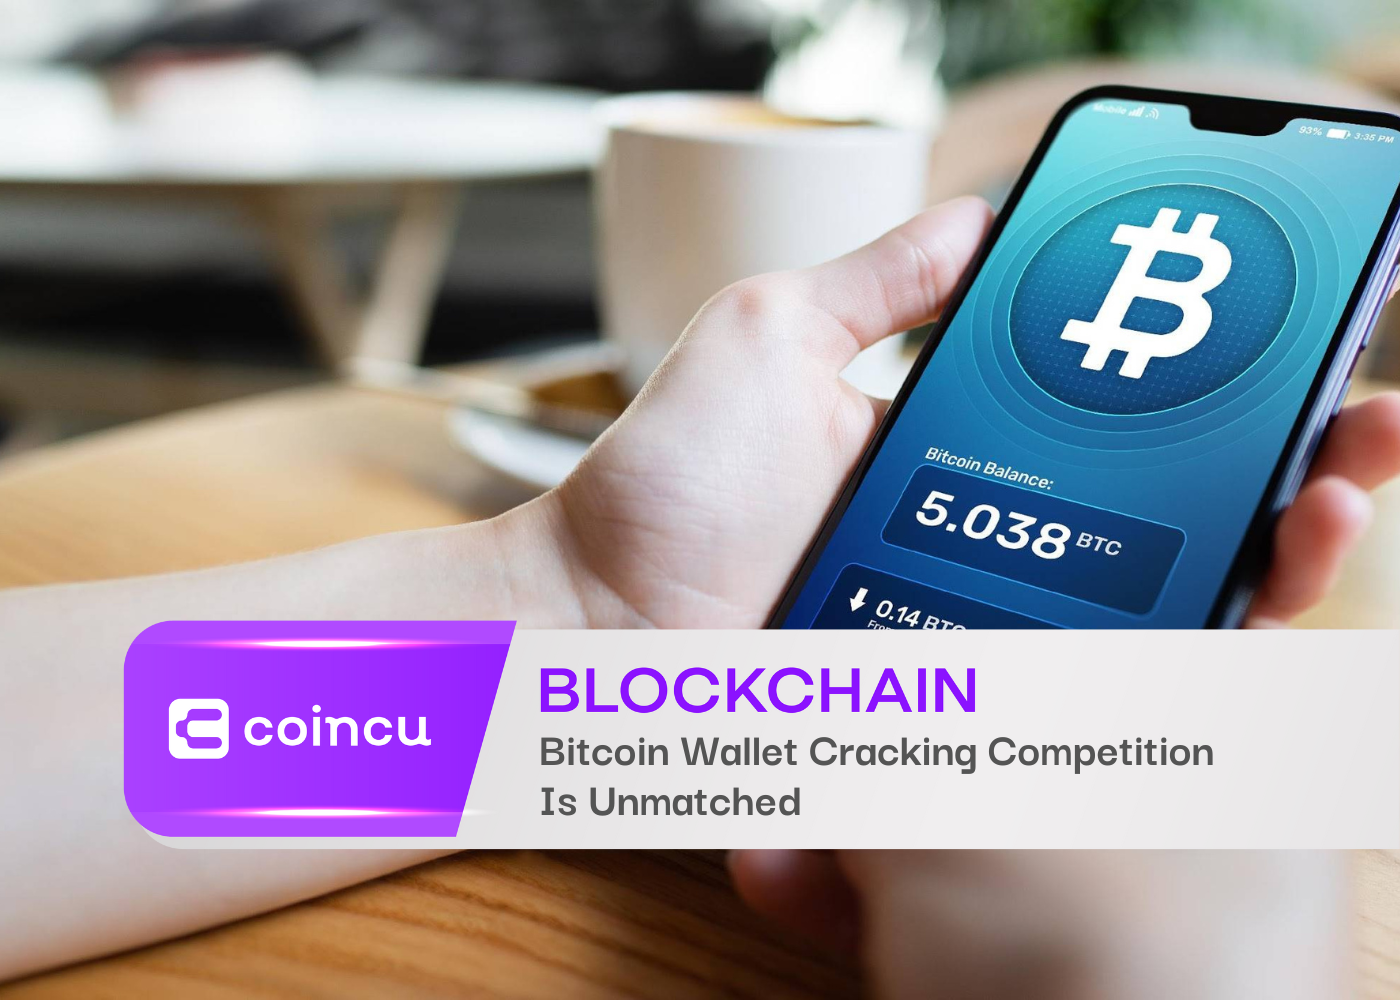 Bitcoin Wallet Cracking Competition